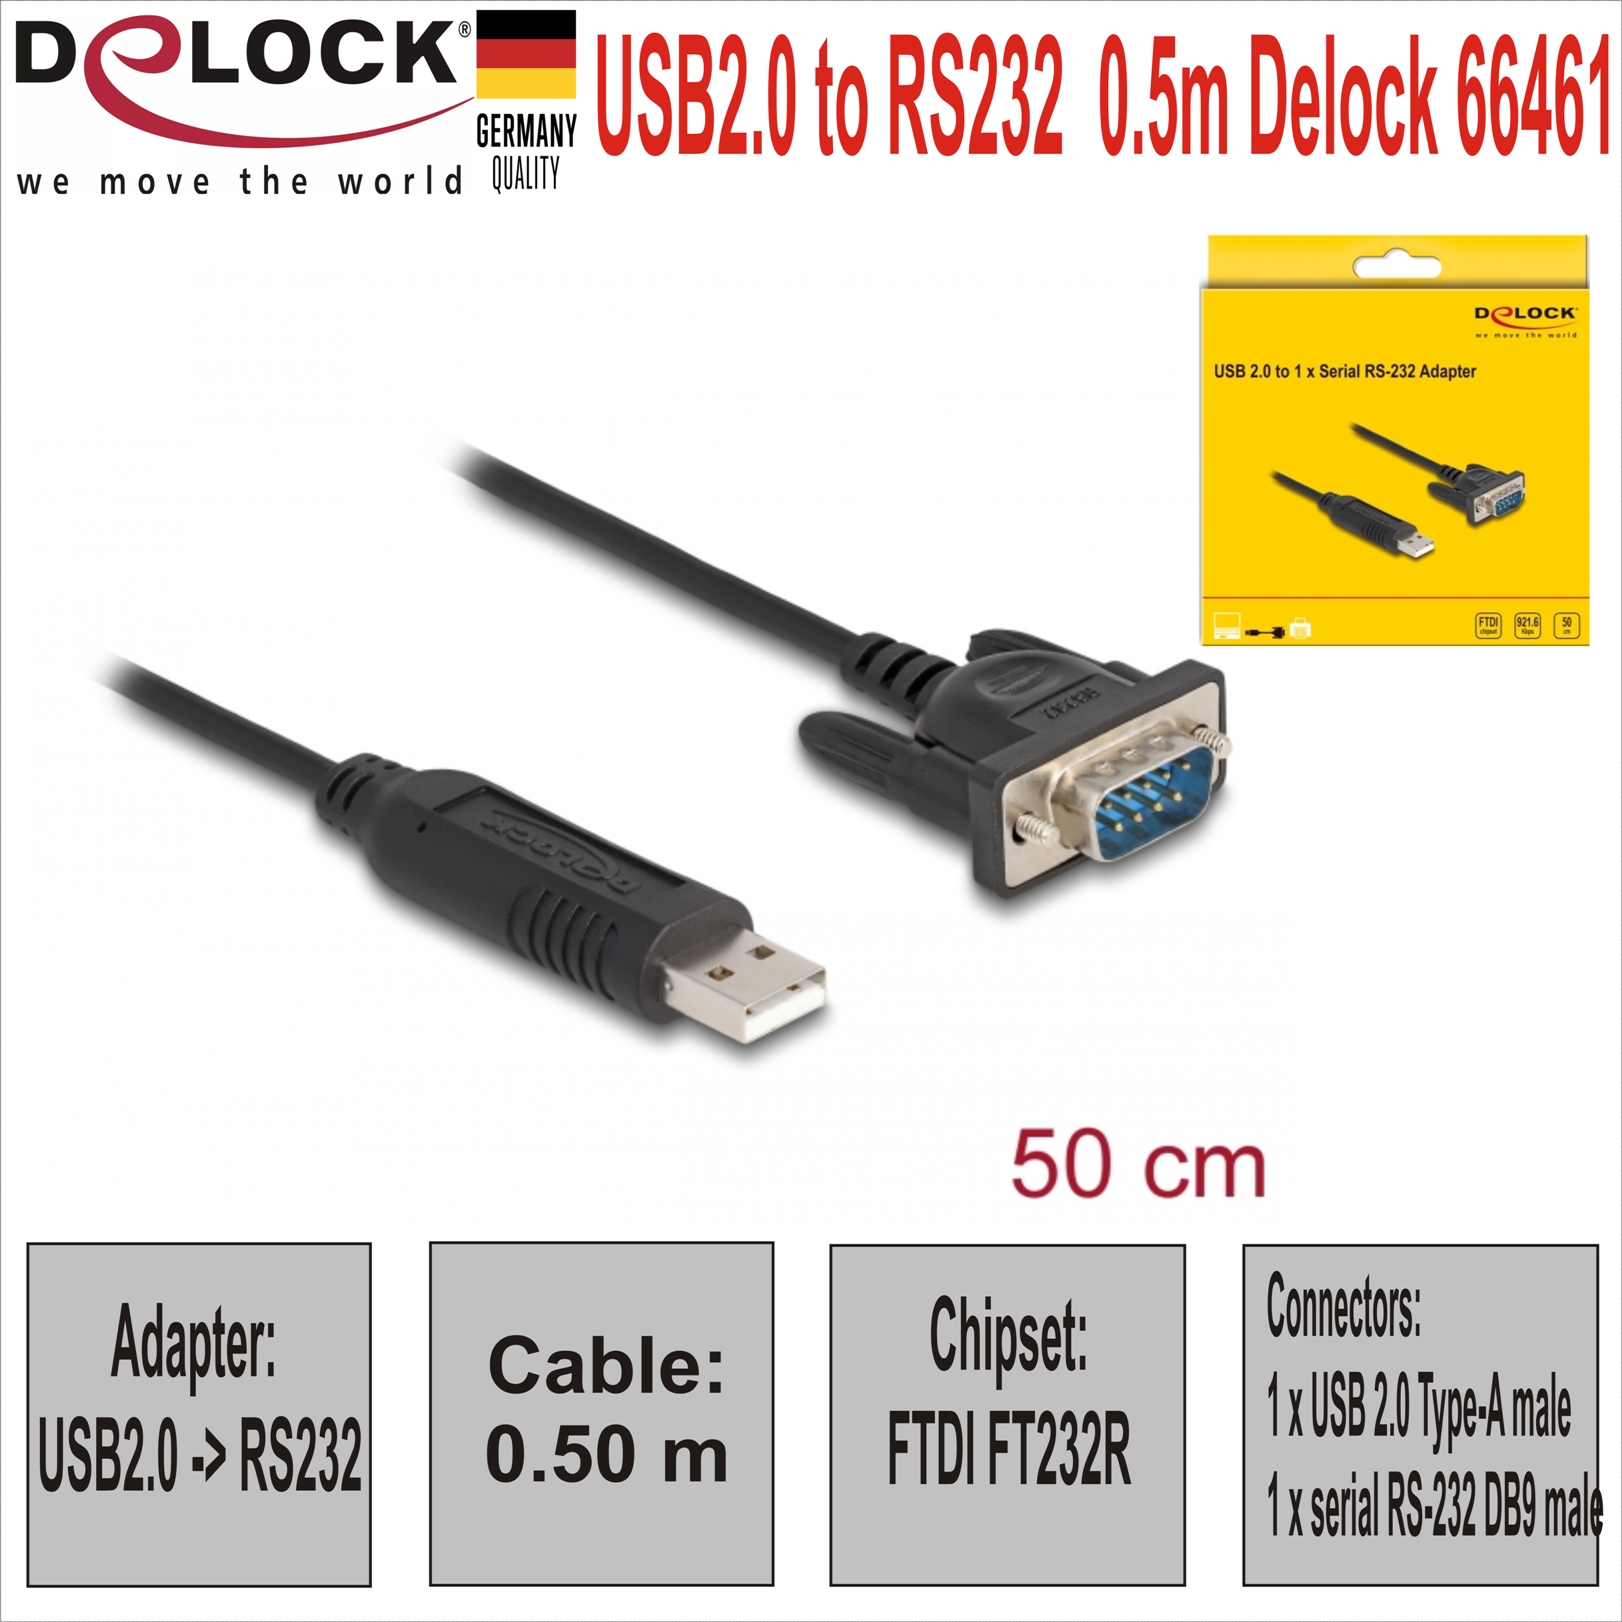 USB2.0 to RS232  0.5m Delock 66461